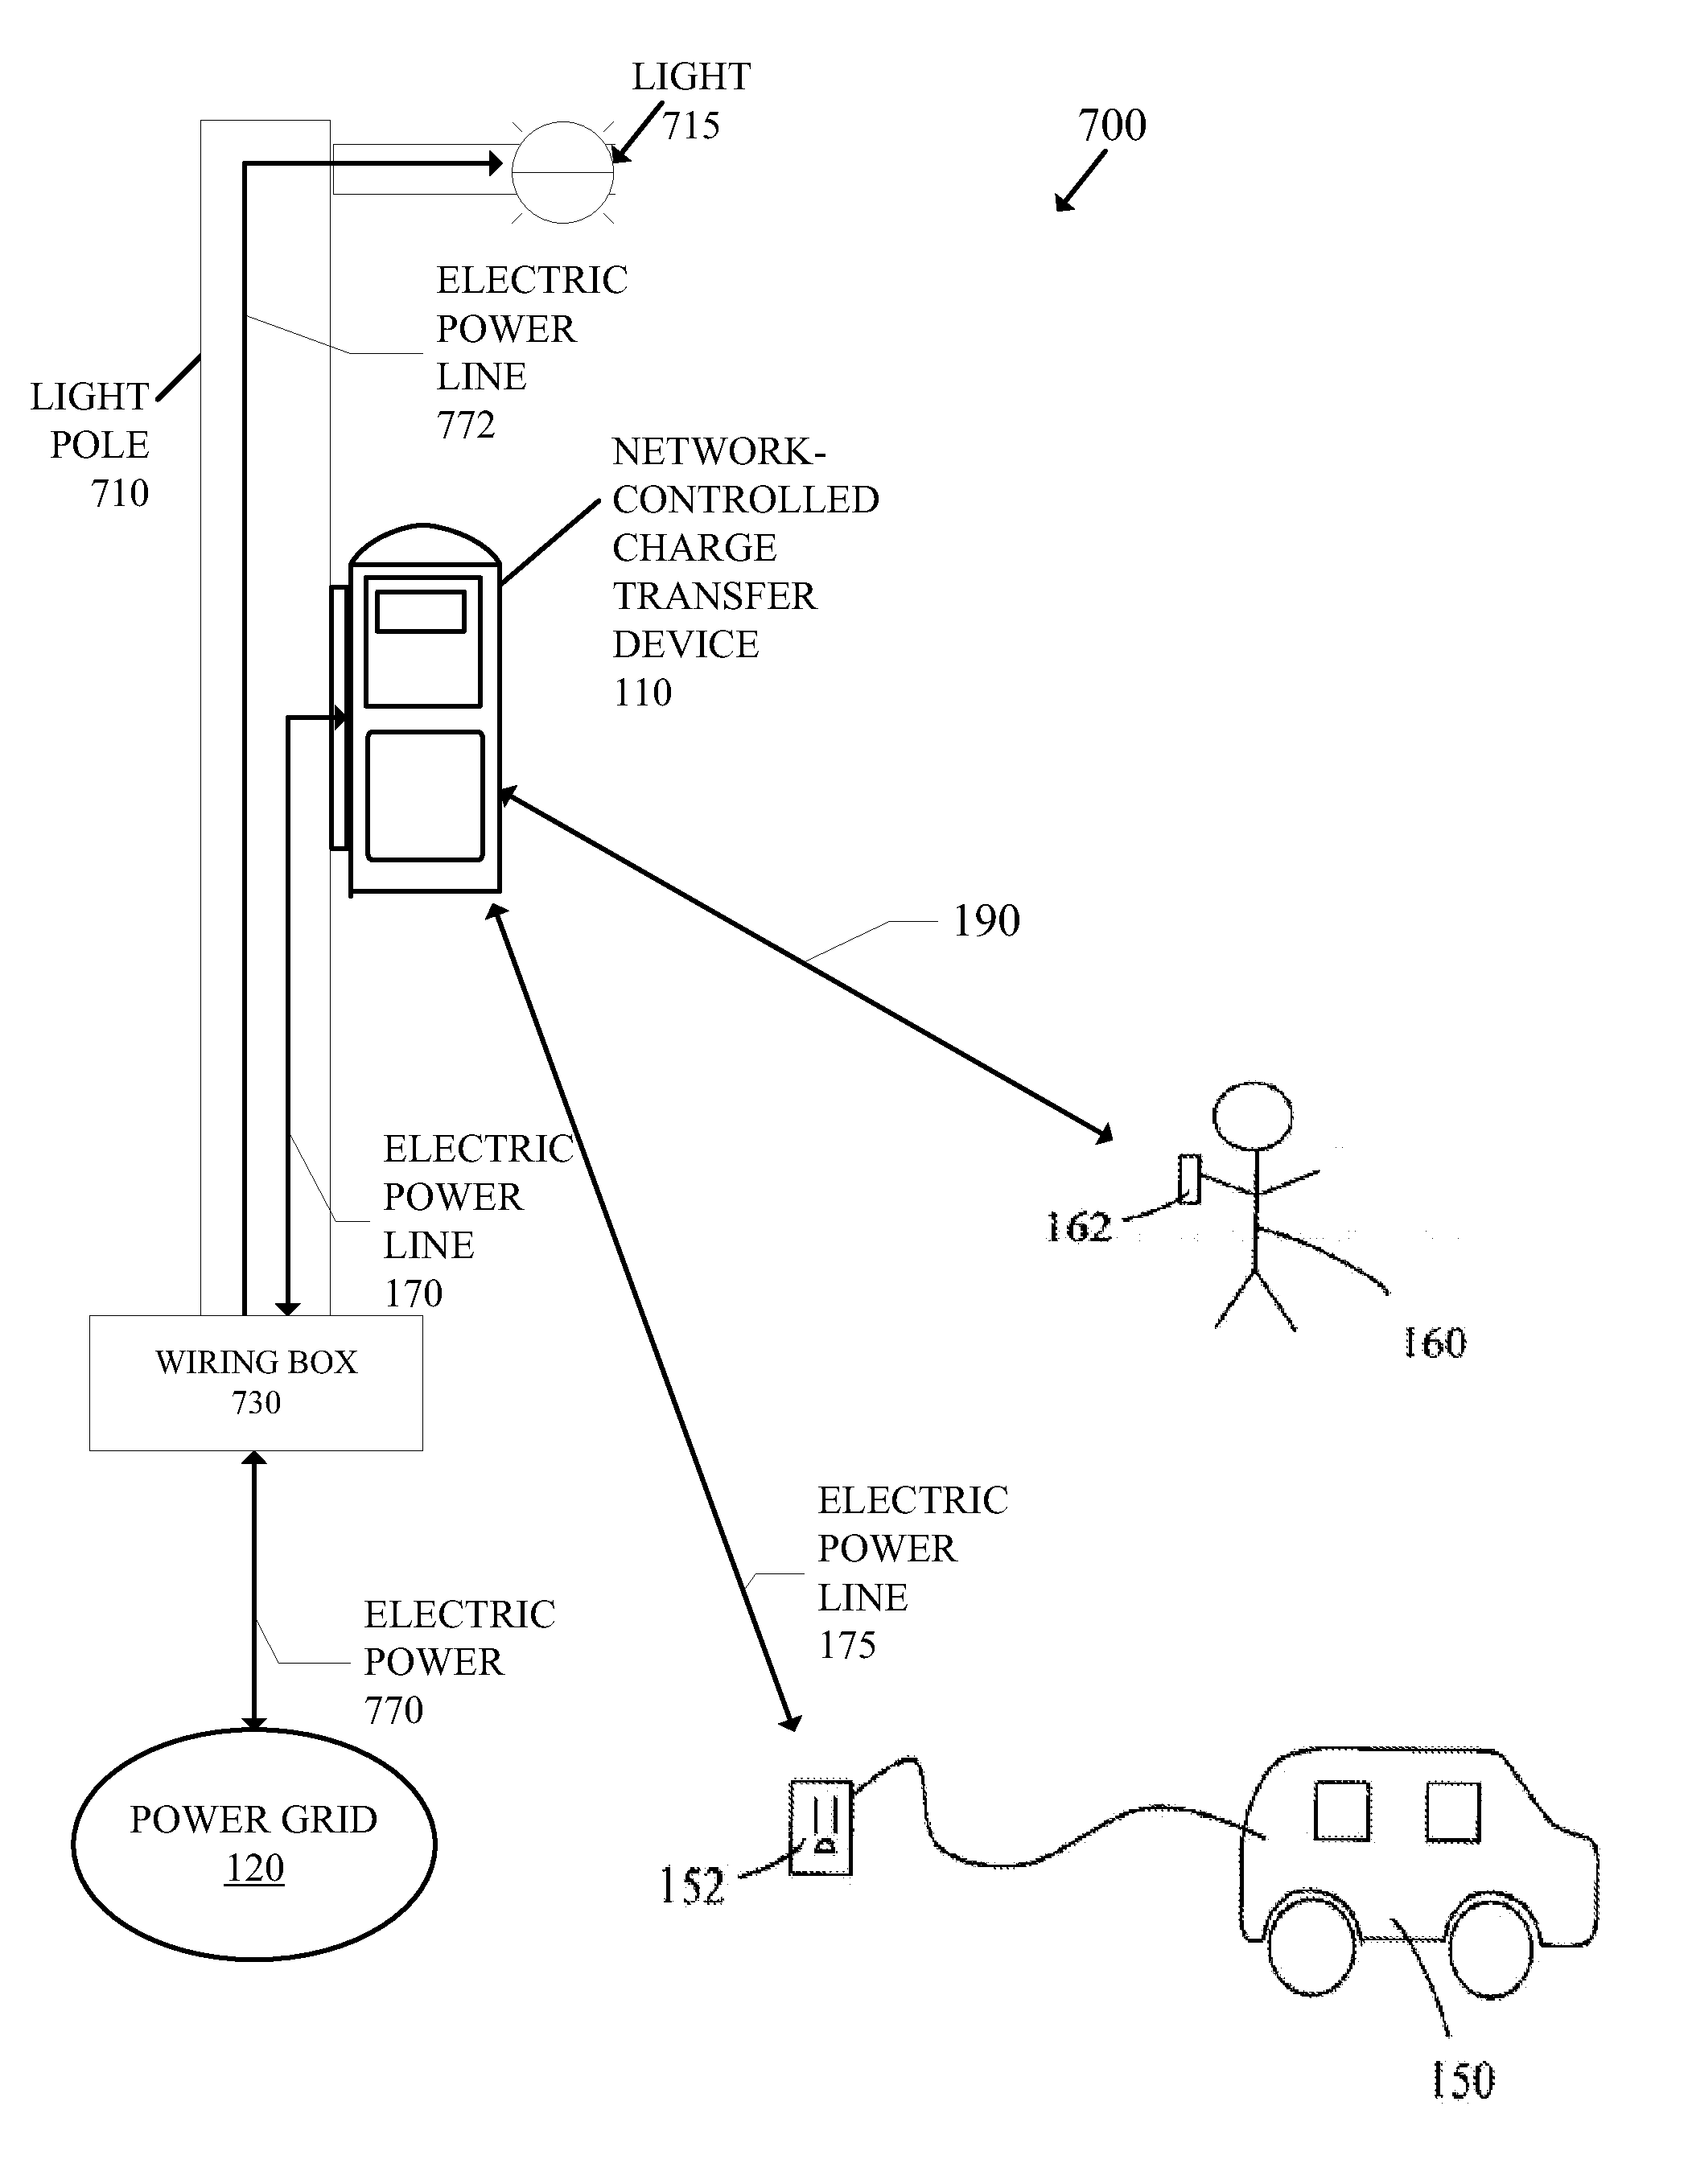 Street light mounted network-controlled charge transfer device for electric vehicles